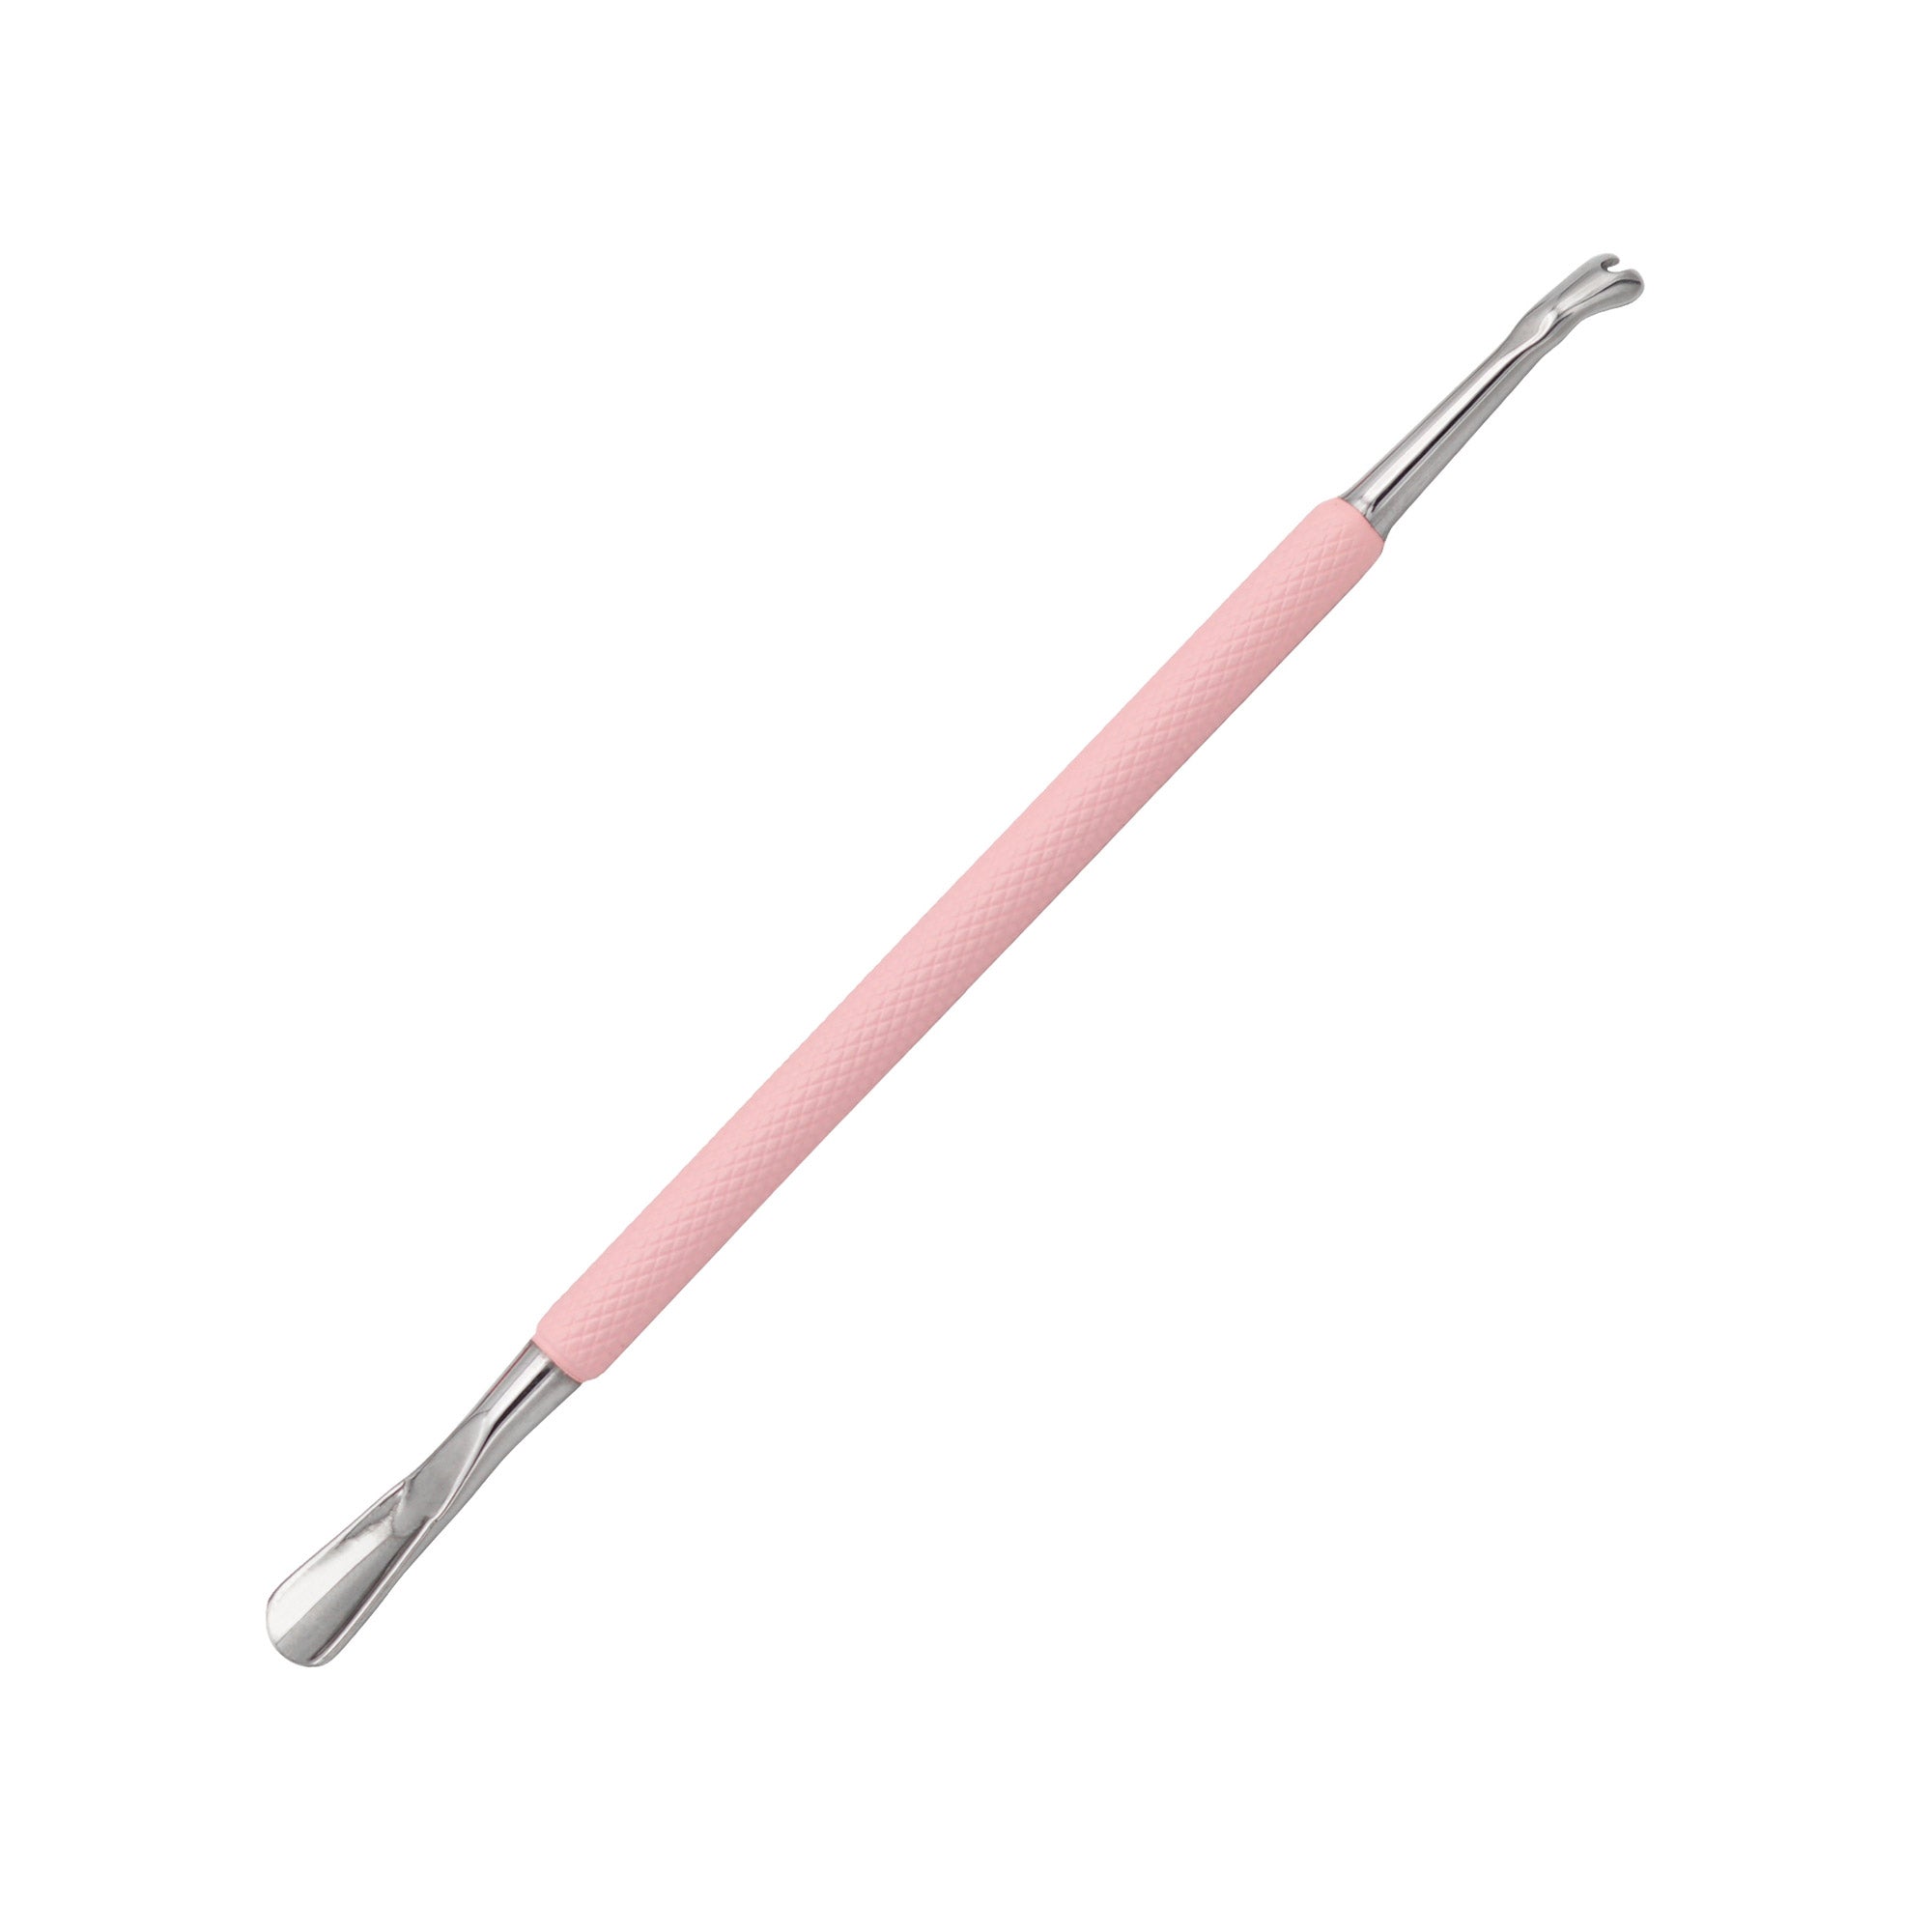 Manicure Tool / Cuticle Pusher & Trimmer / Pink Nail Tech Salon Essential Tool